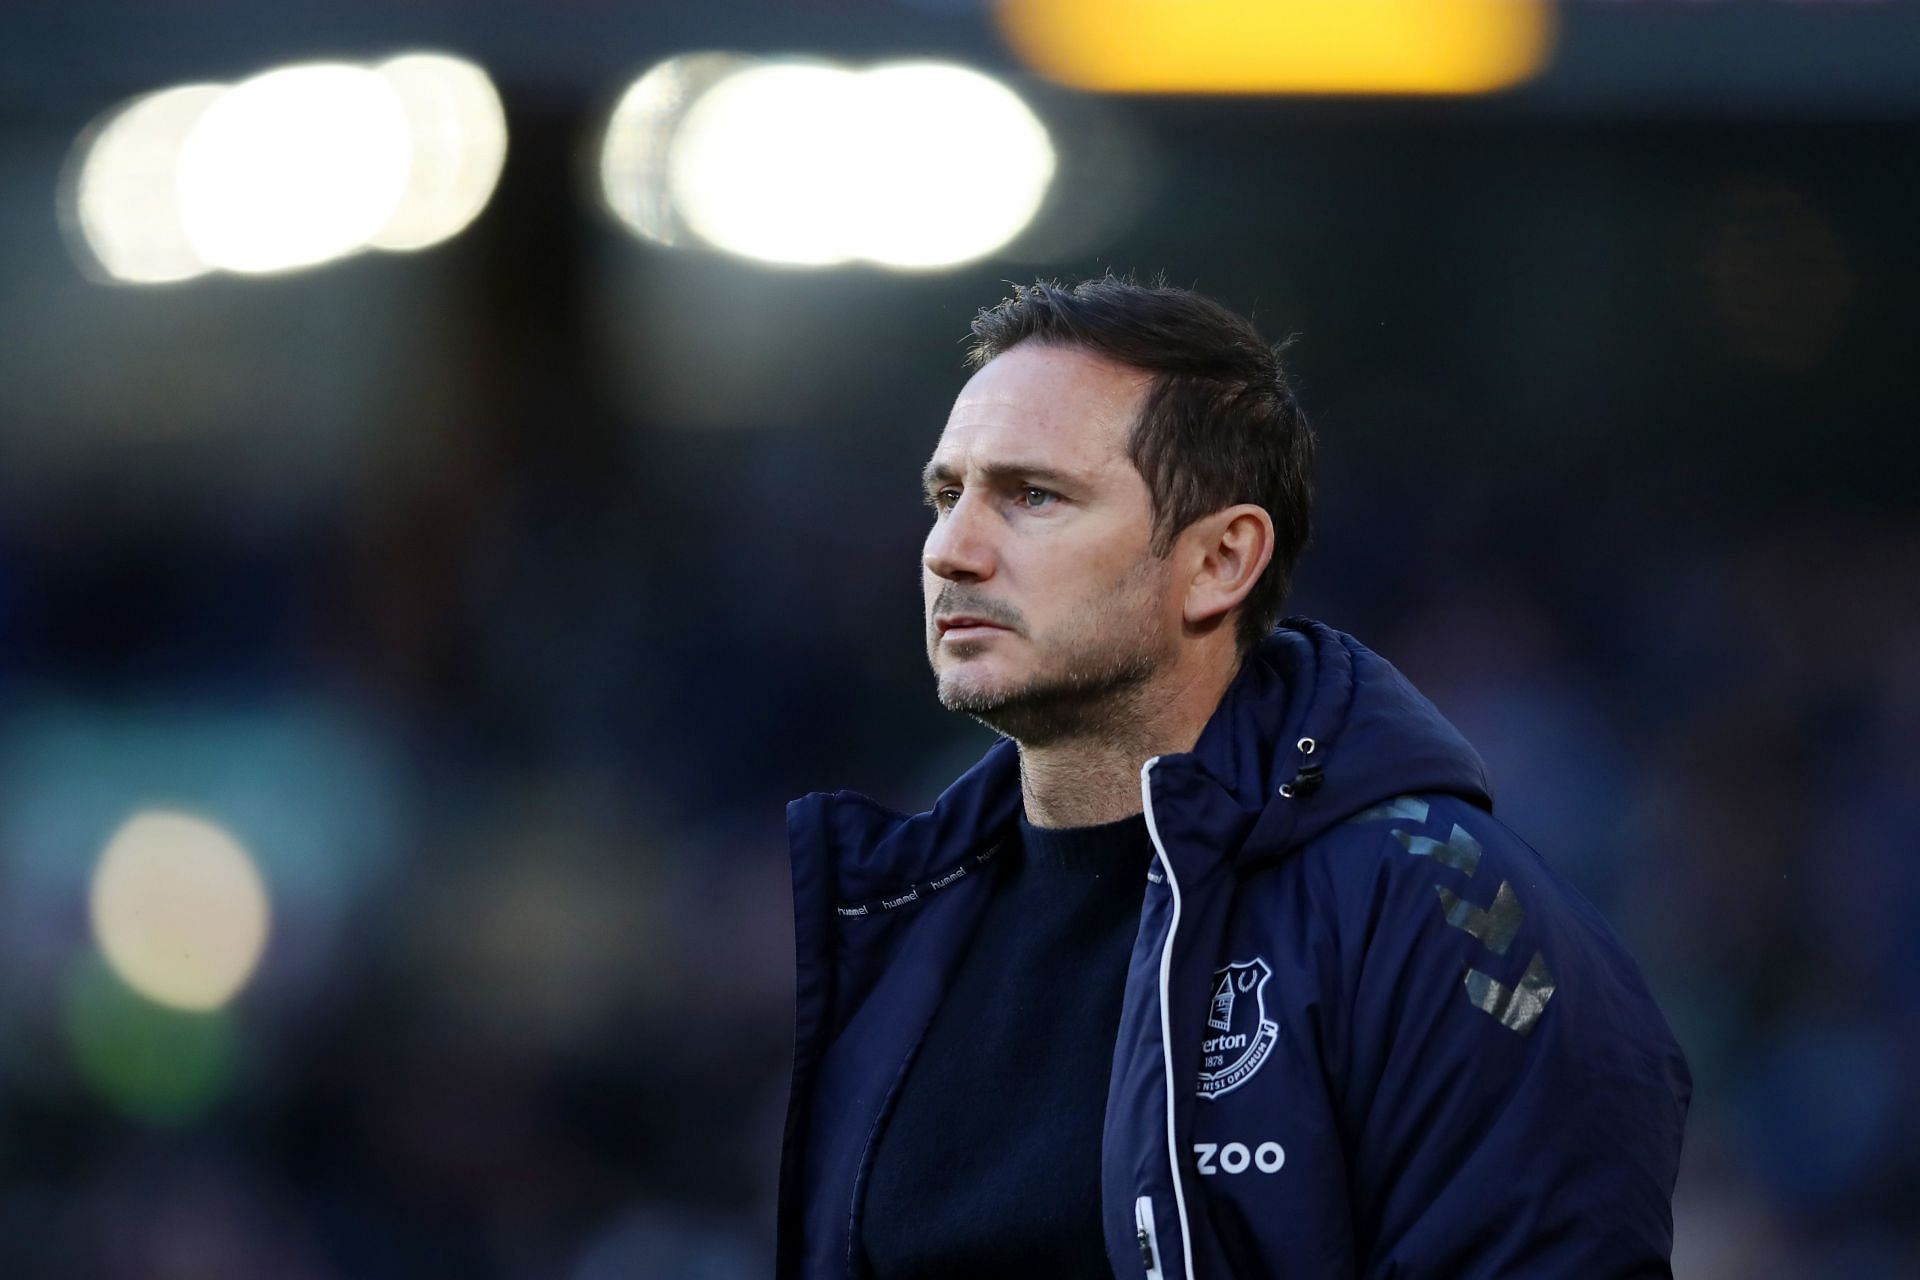 Lampard has a storied rivalry with Manchester United